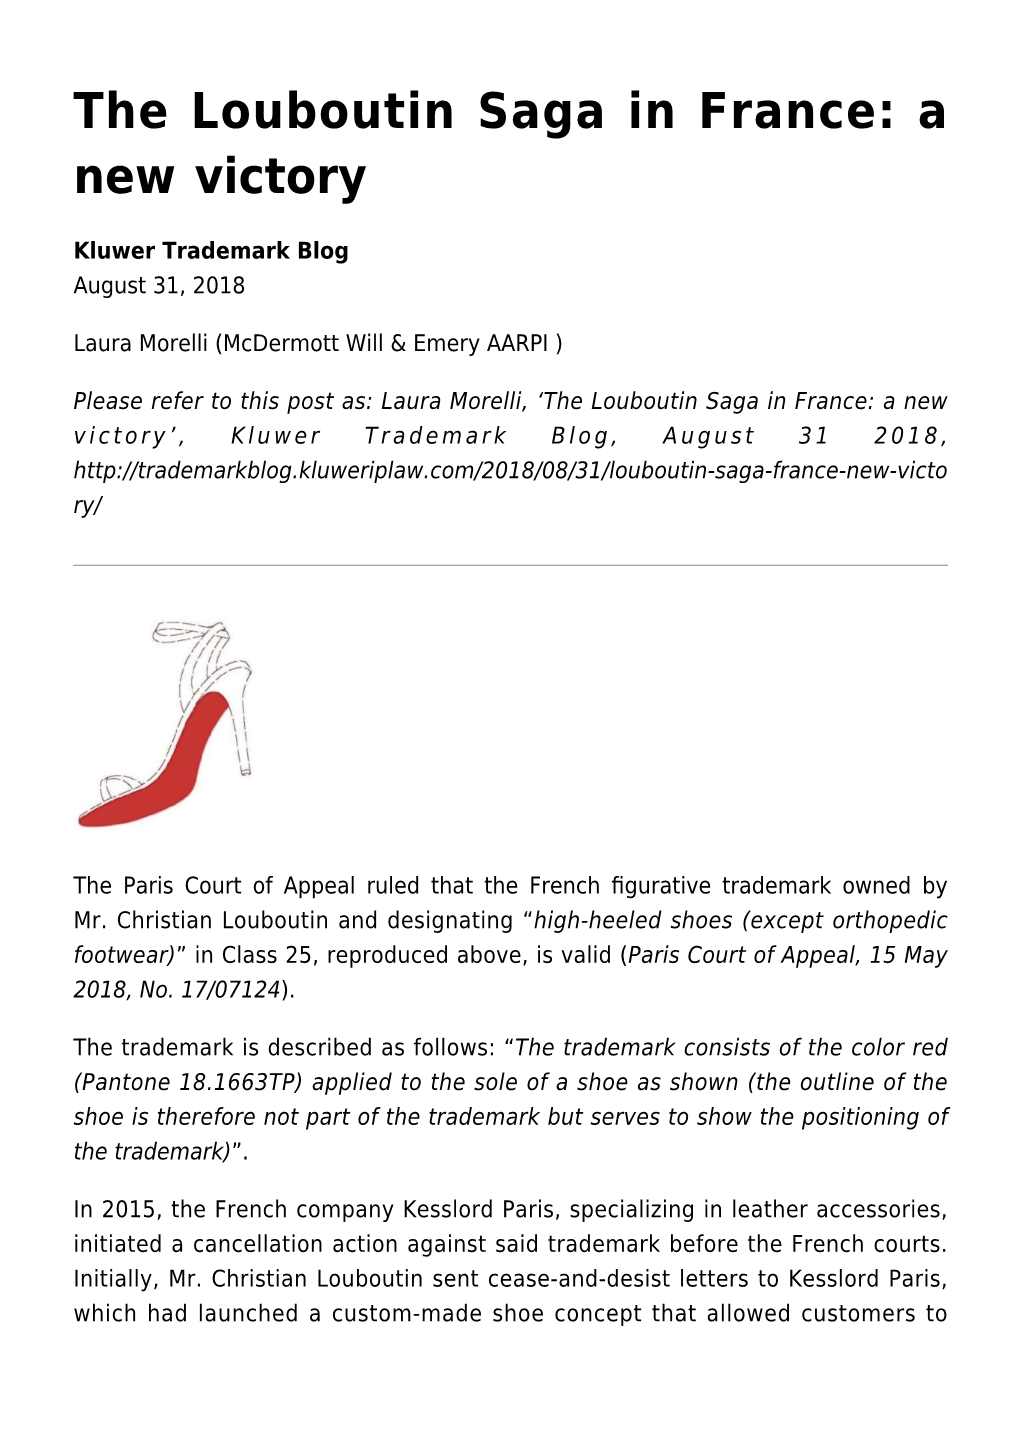 The Louboutin Saga in France: a New Victory